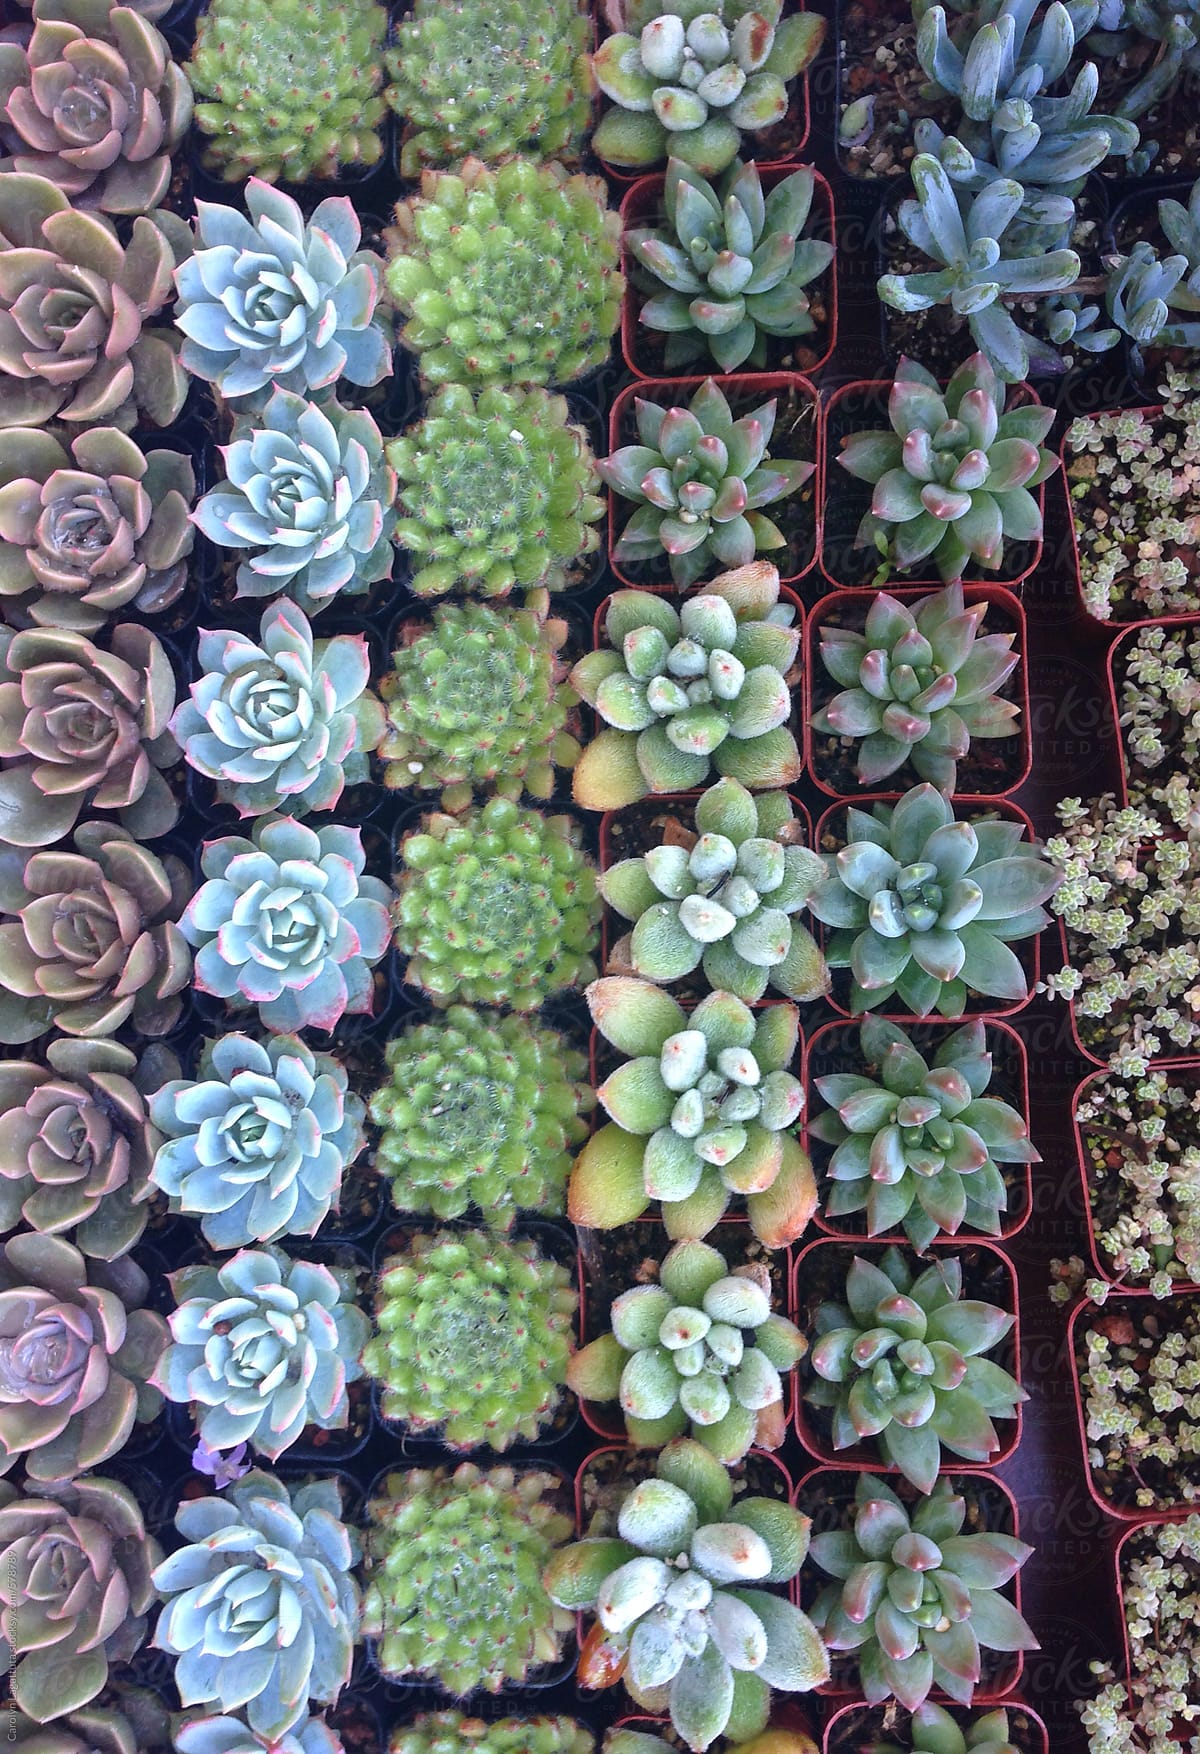 Rows of small succulents